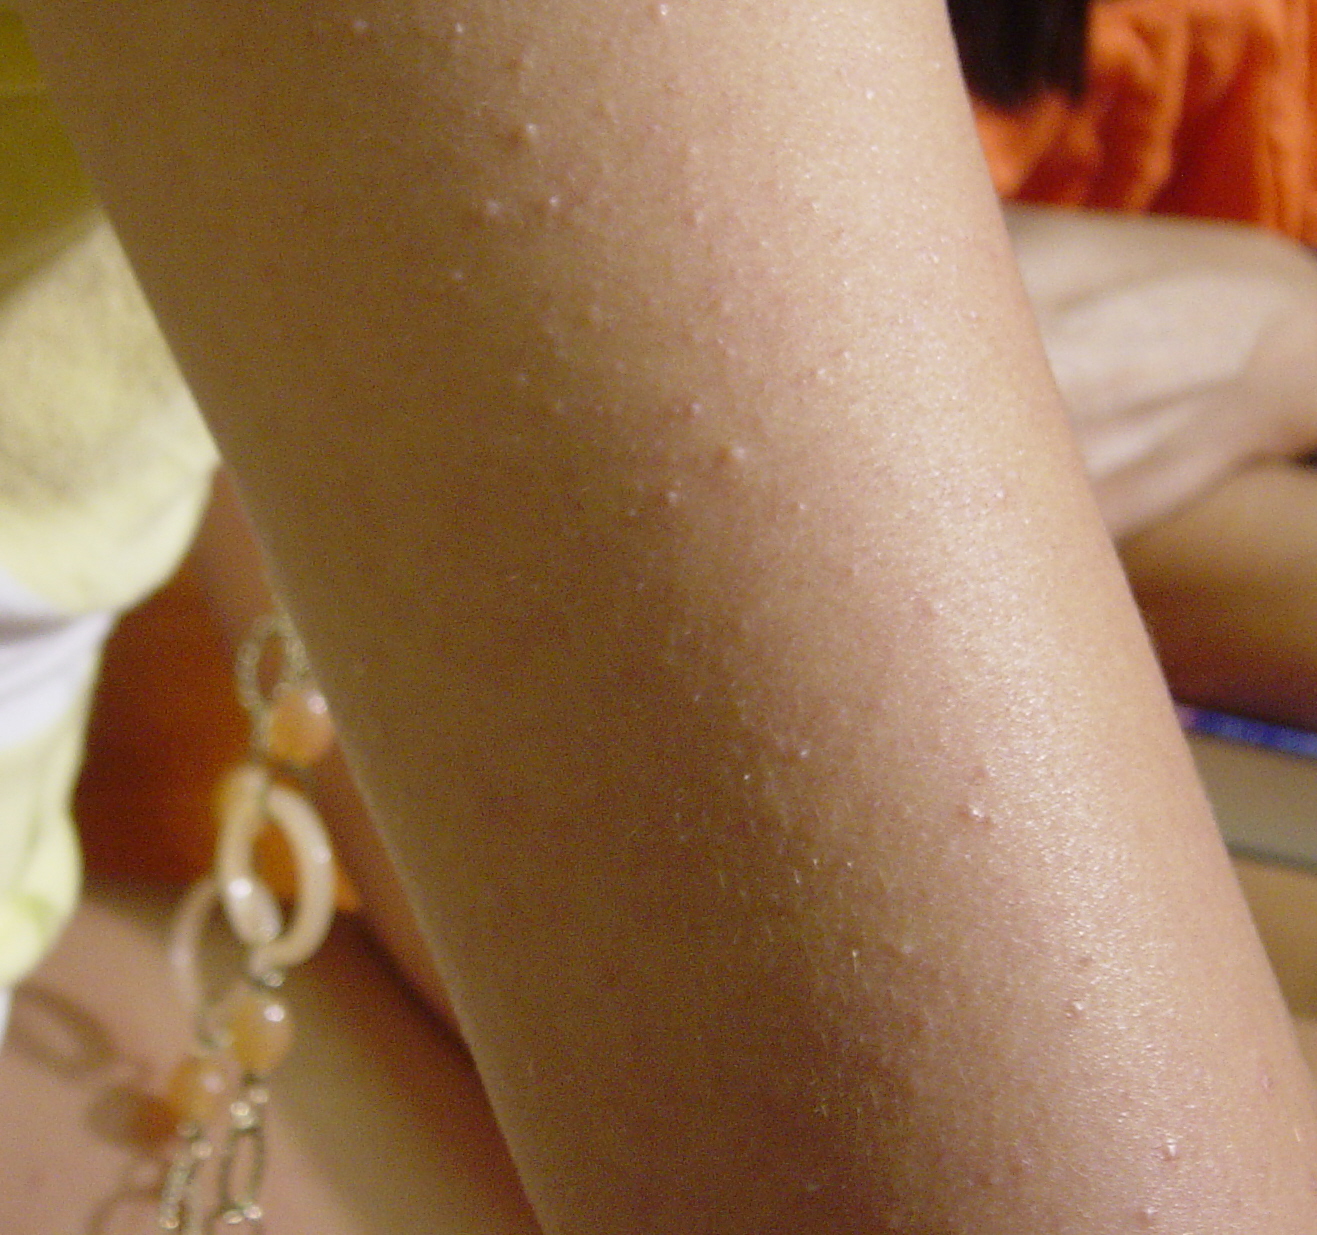 Keratosis Pilaris K P Is A Skin Condition Effecting Roughly Half Of The Population And Resulting In A Goose Flesh Appearance Or Dry Scaly Bumps Covering The Arms Thighs Buttocks Varying Degrees Of